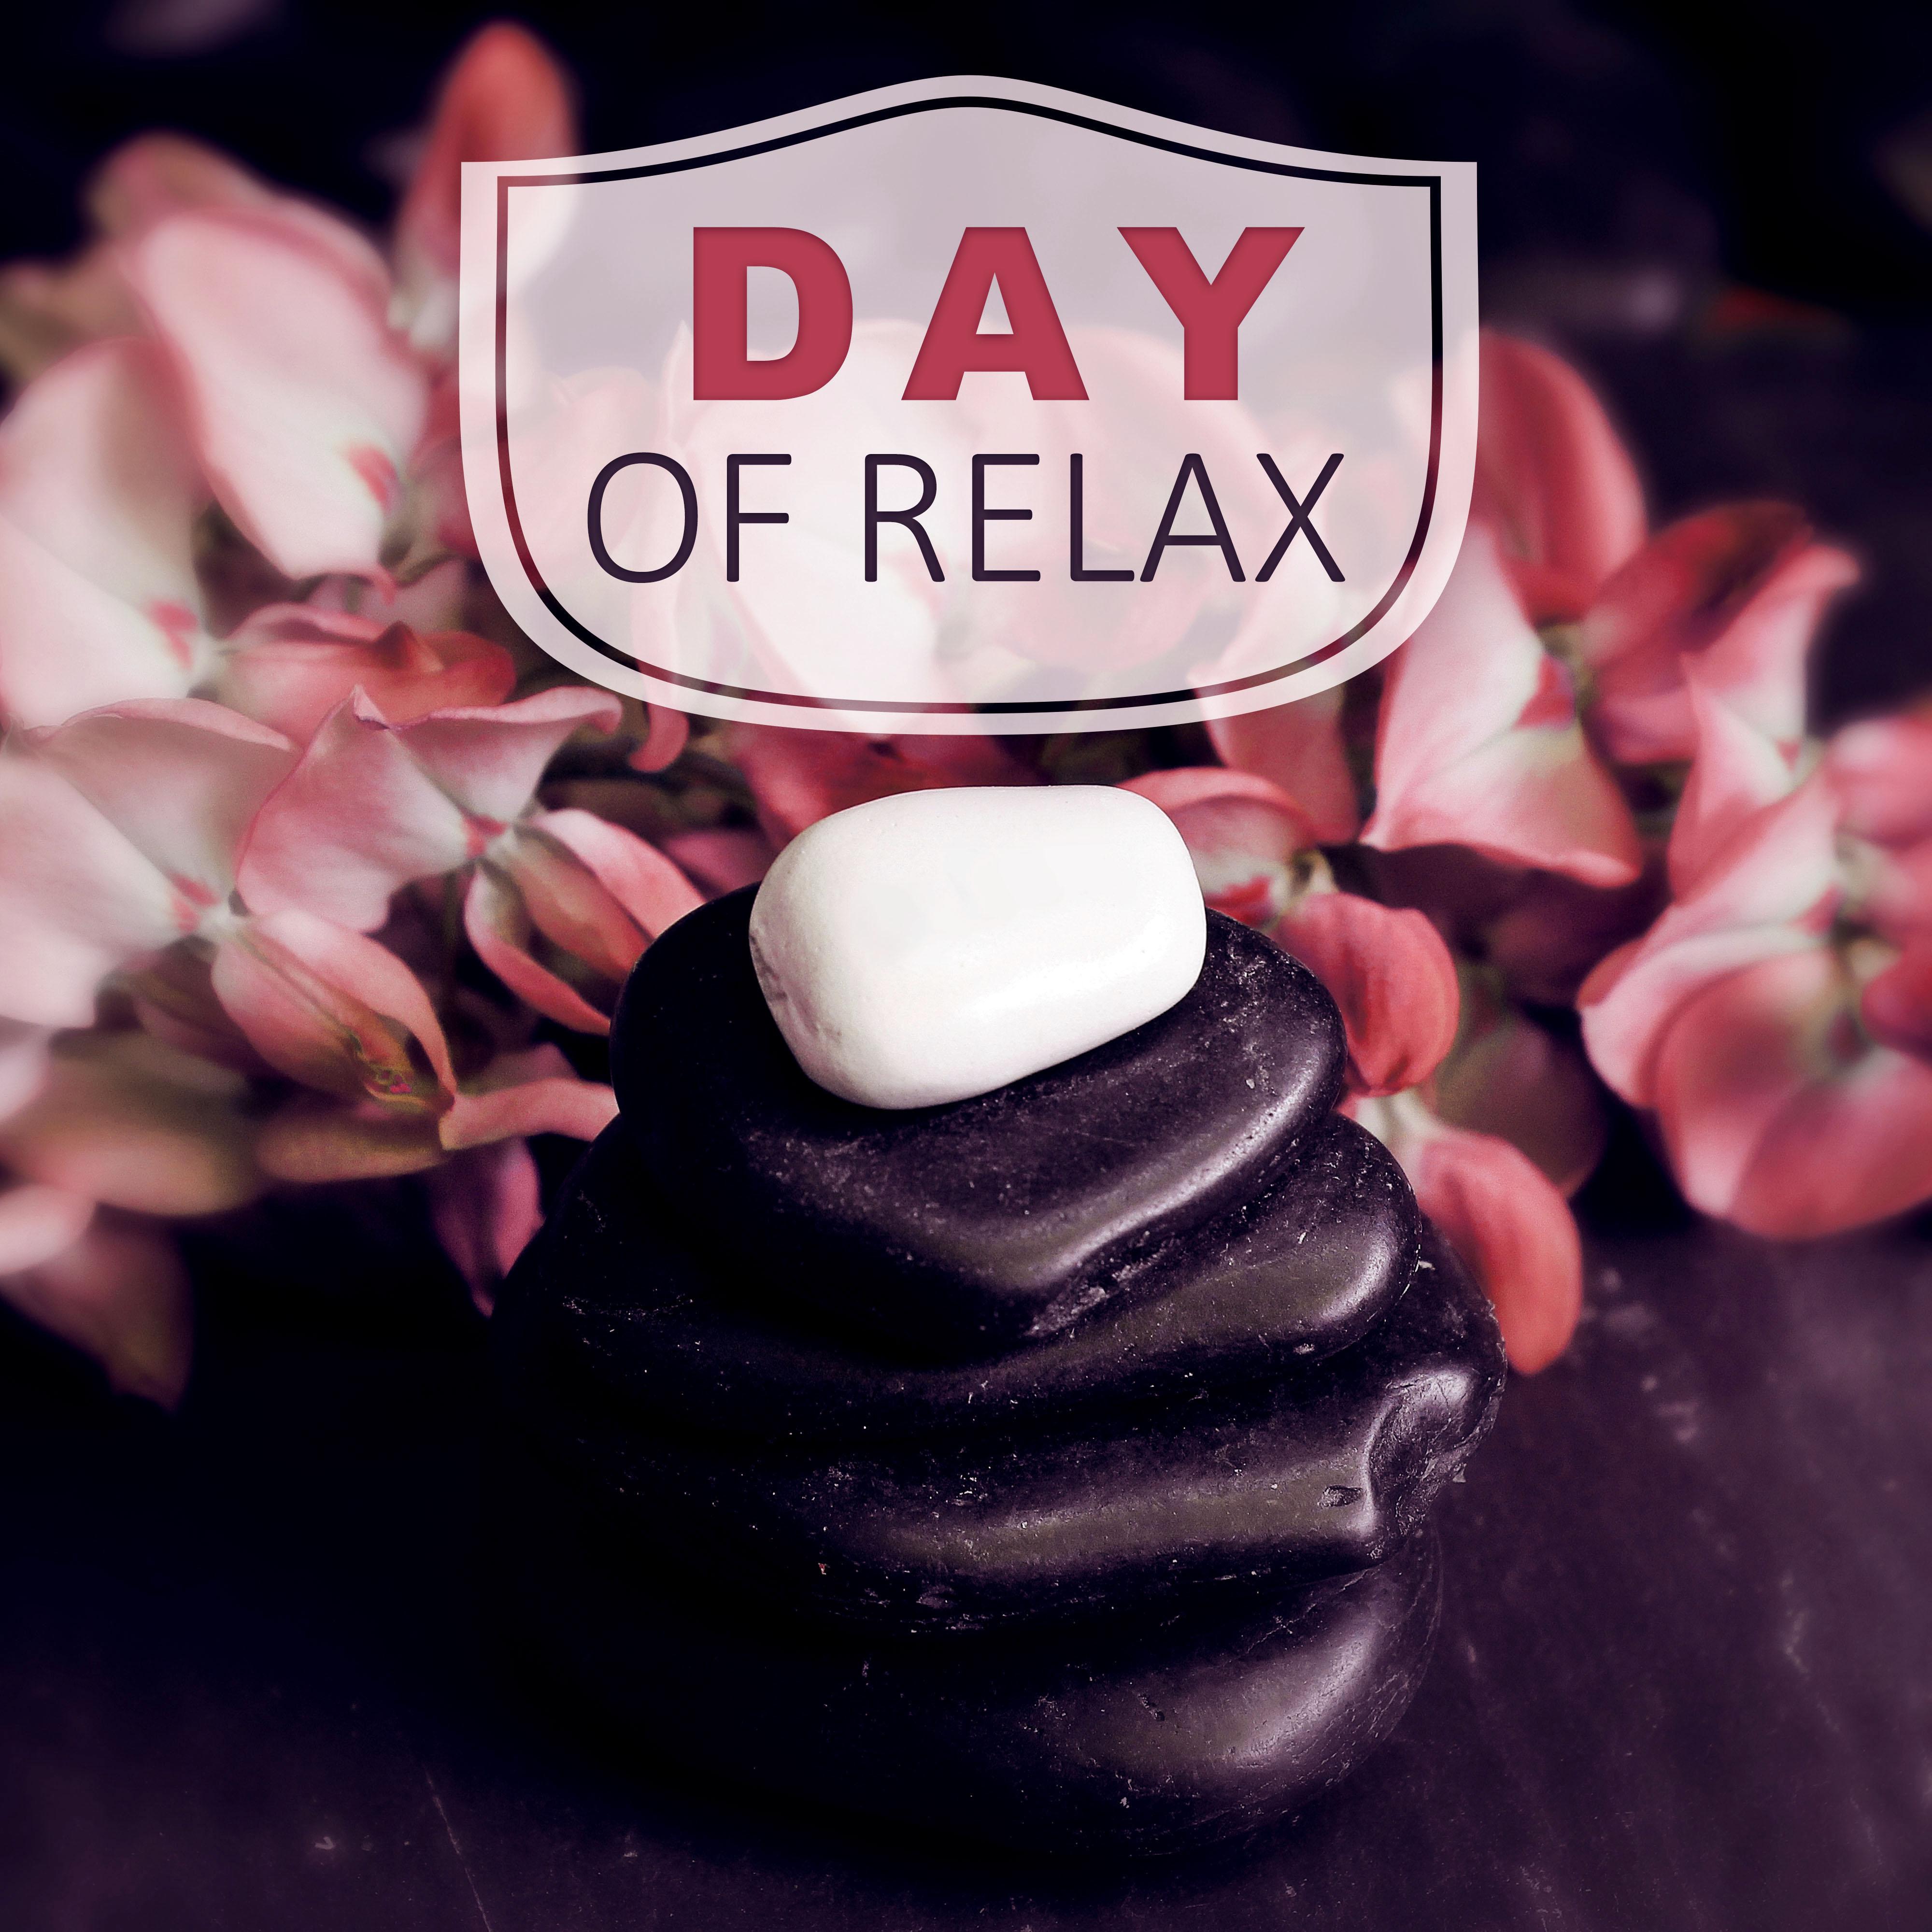 Day of Relax  Soft Music for Relaxing Therapy, Massage, Spa, Wellness, Calming Music, Rest, Nature Sounds